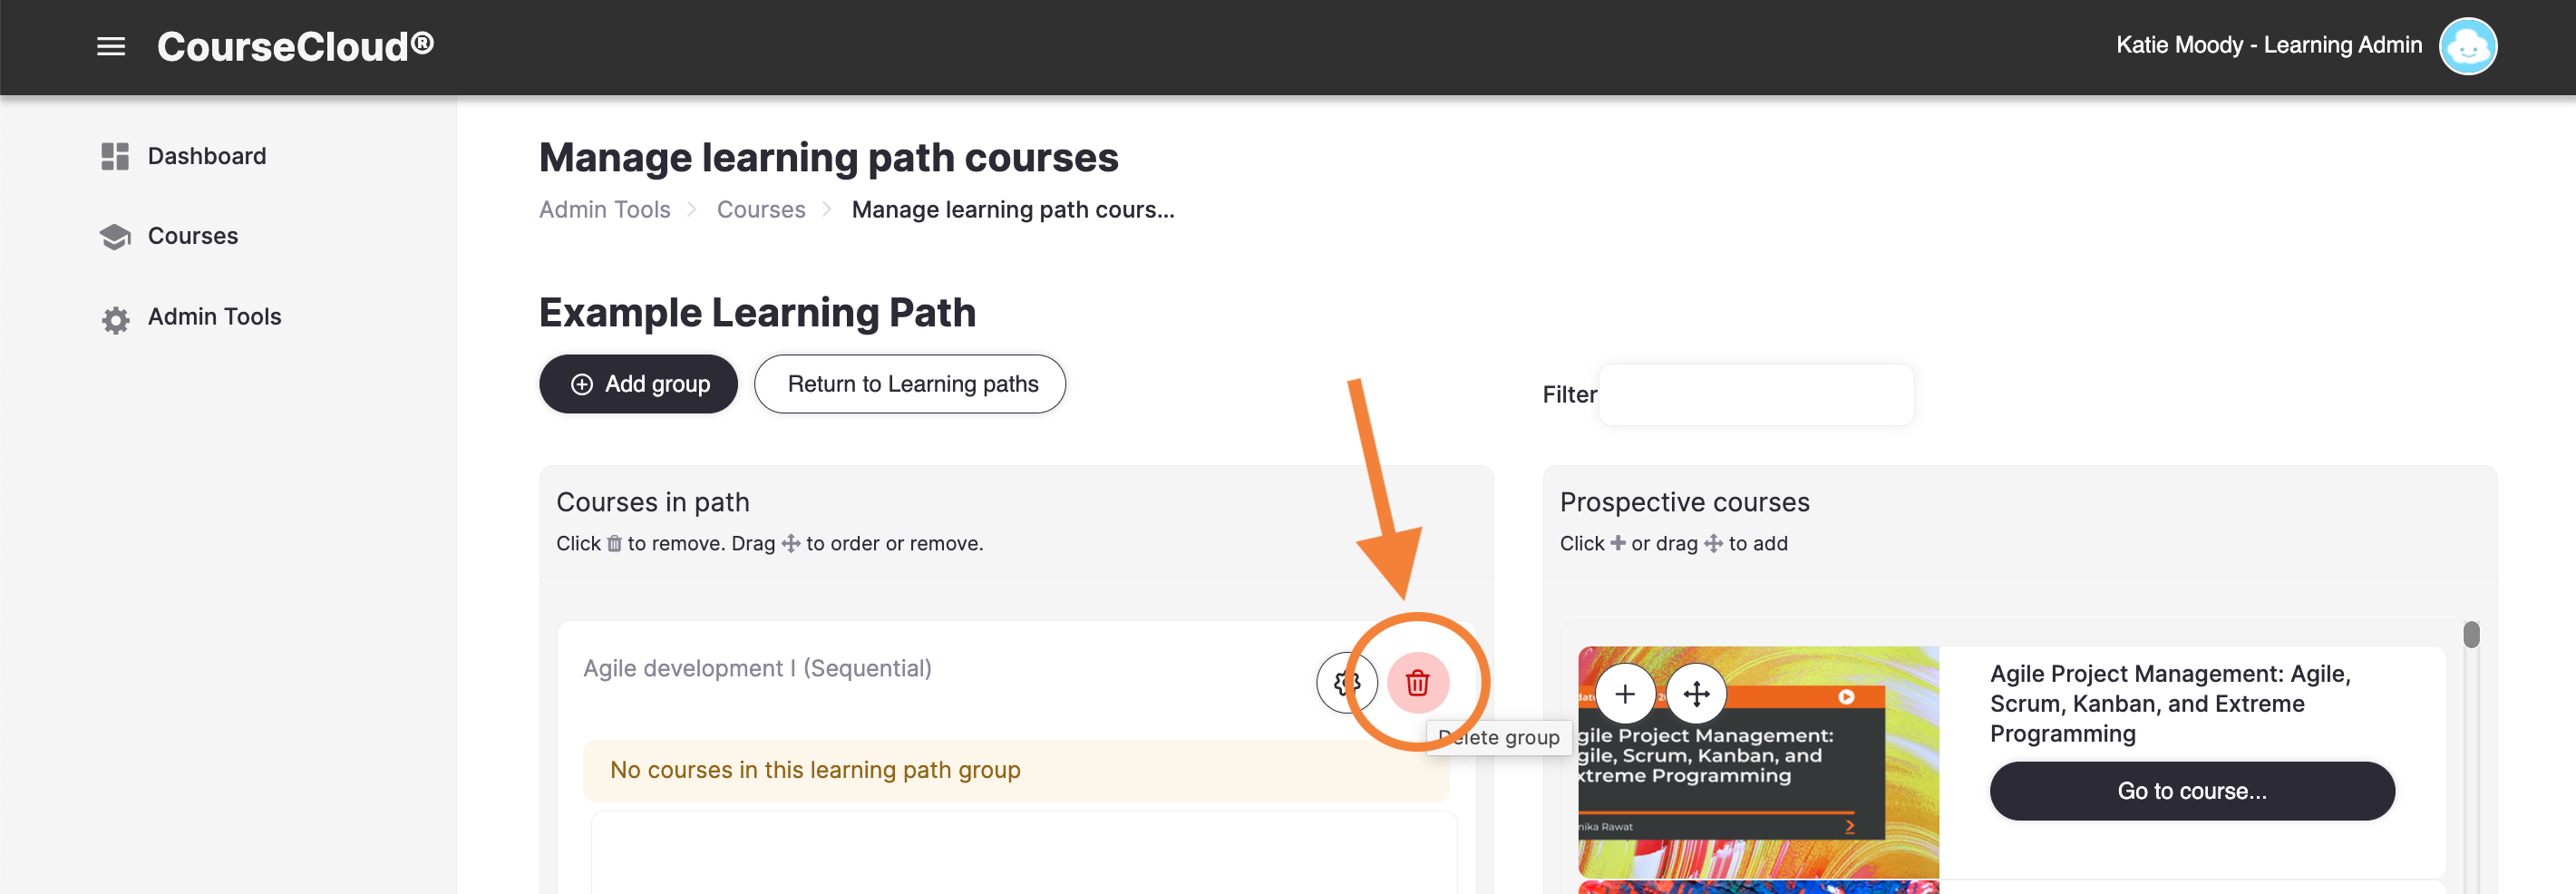 15_-_The_Manage_Learning_Path_Courses_page__indicating_the_example_group_s_Delete_icon.png